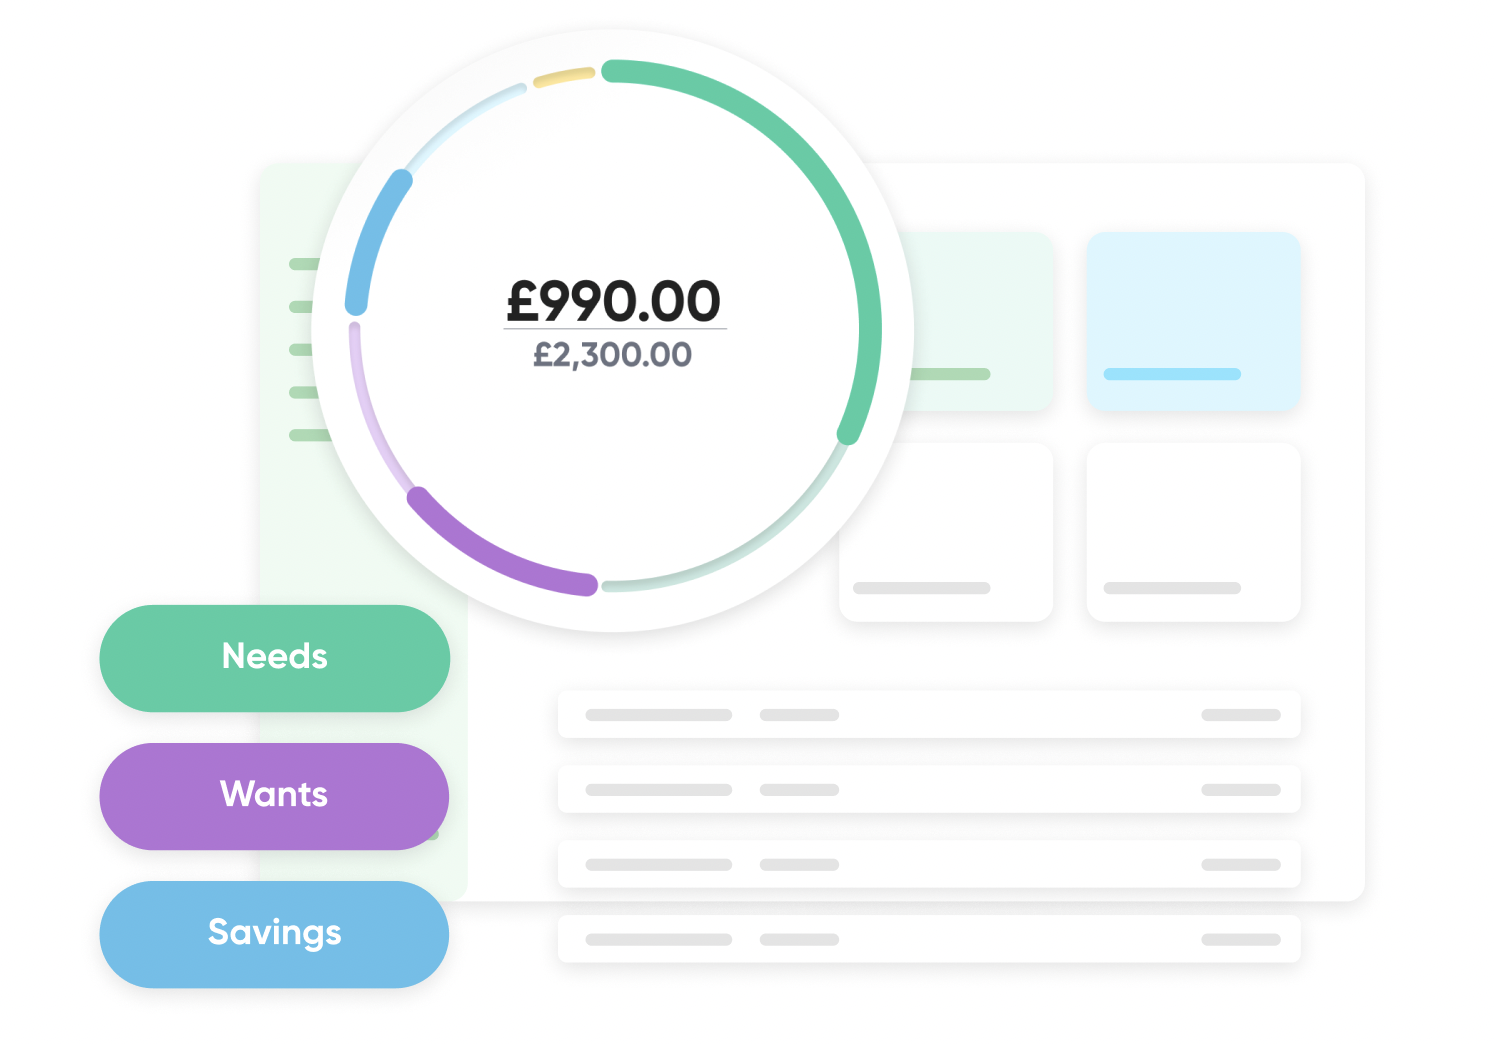 Claro budgeting tool image for free trial blog post